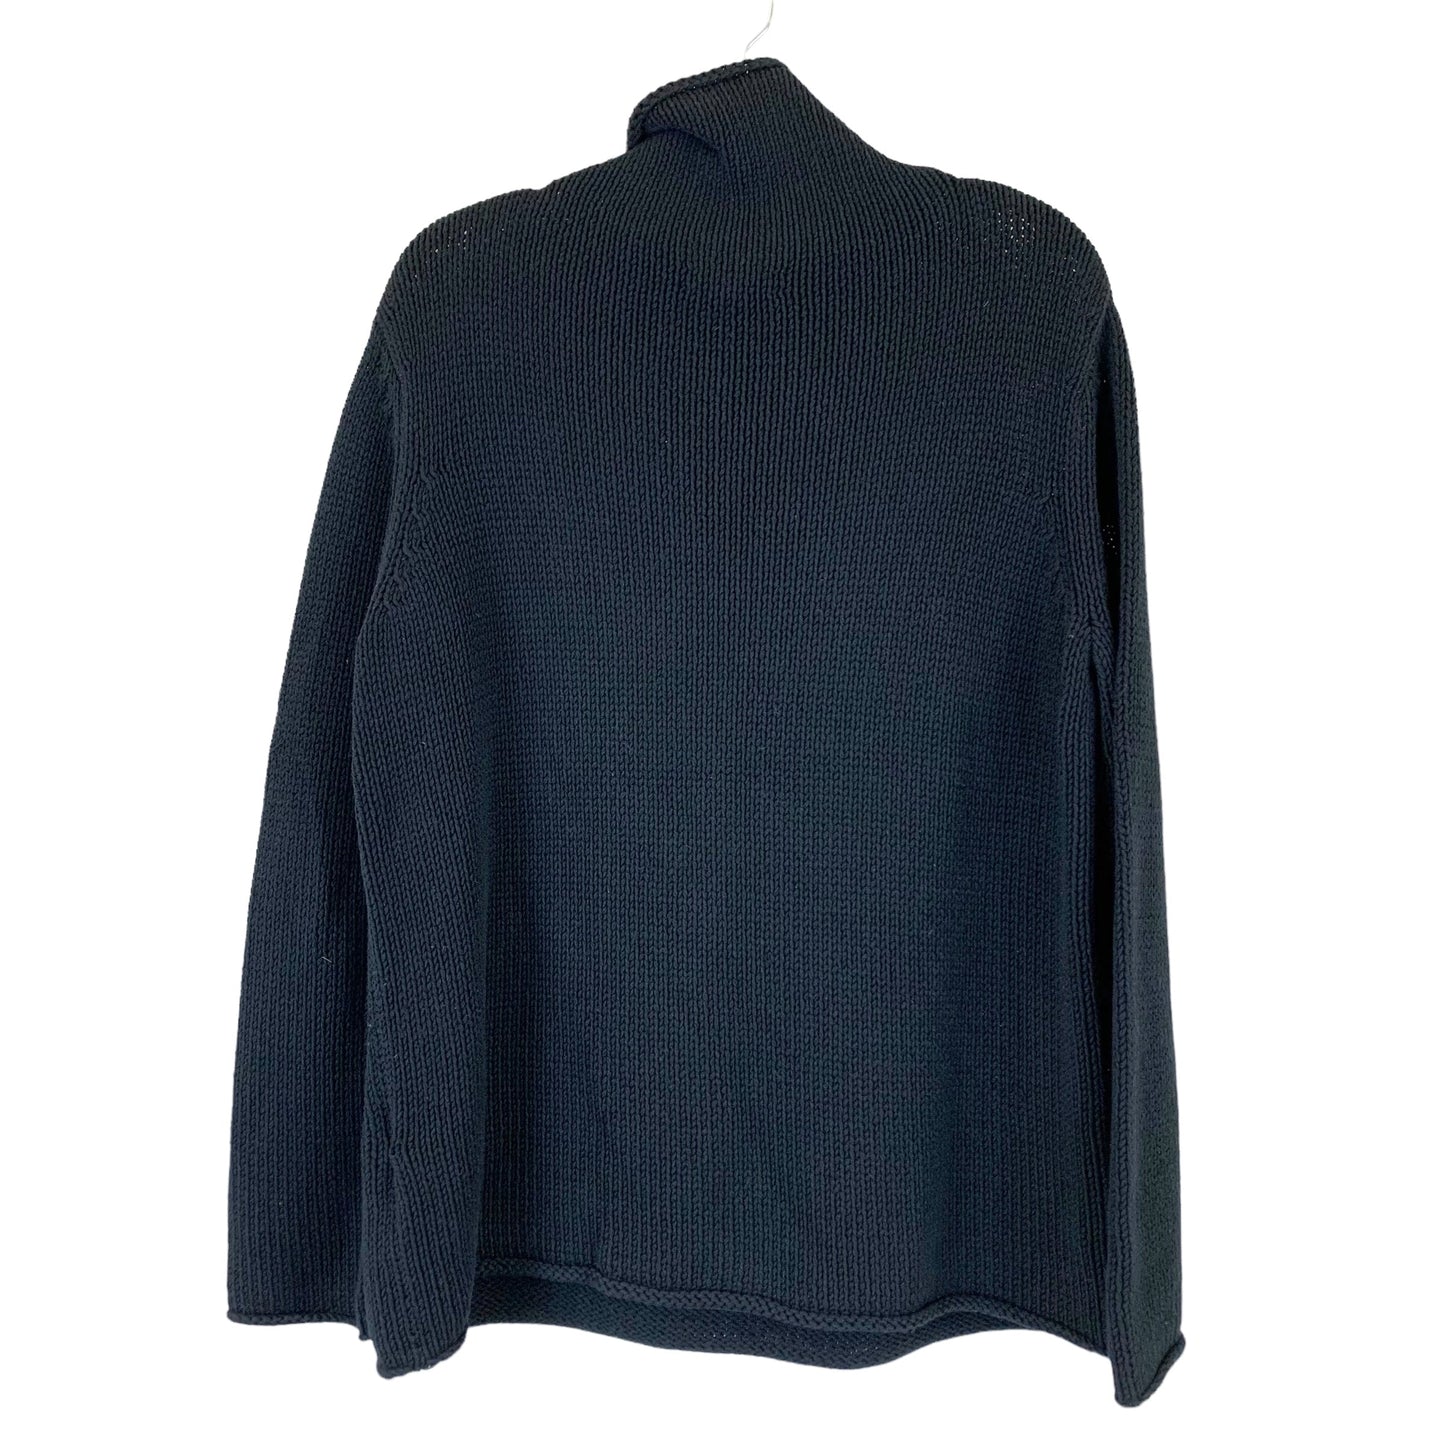 Sweater By Dkny  Size: M